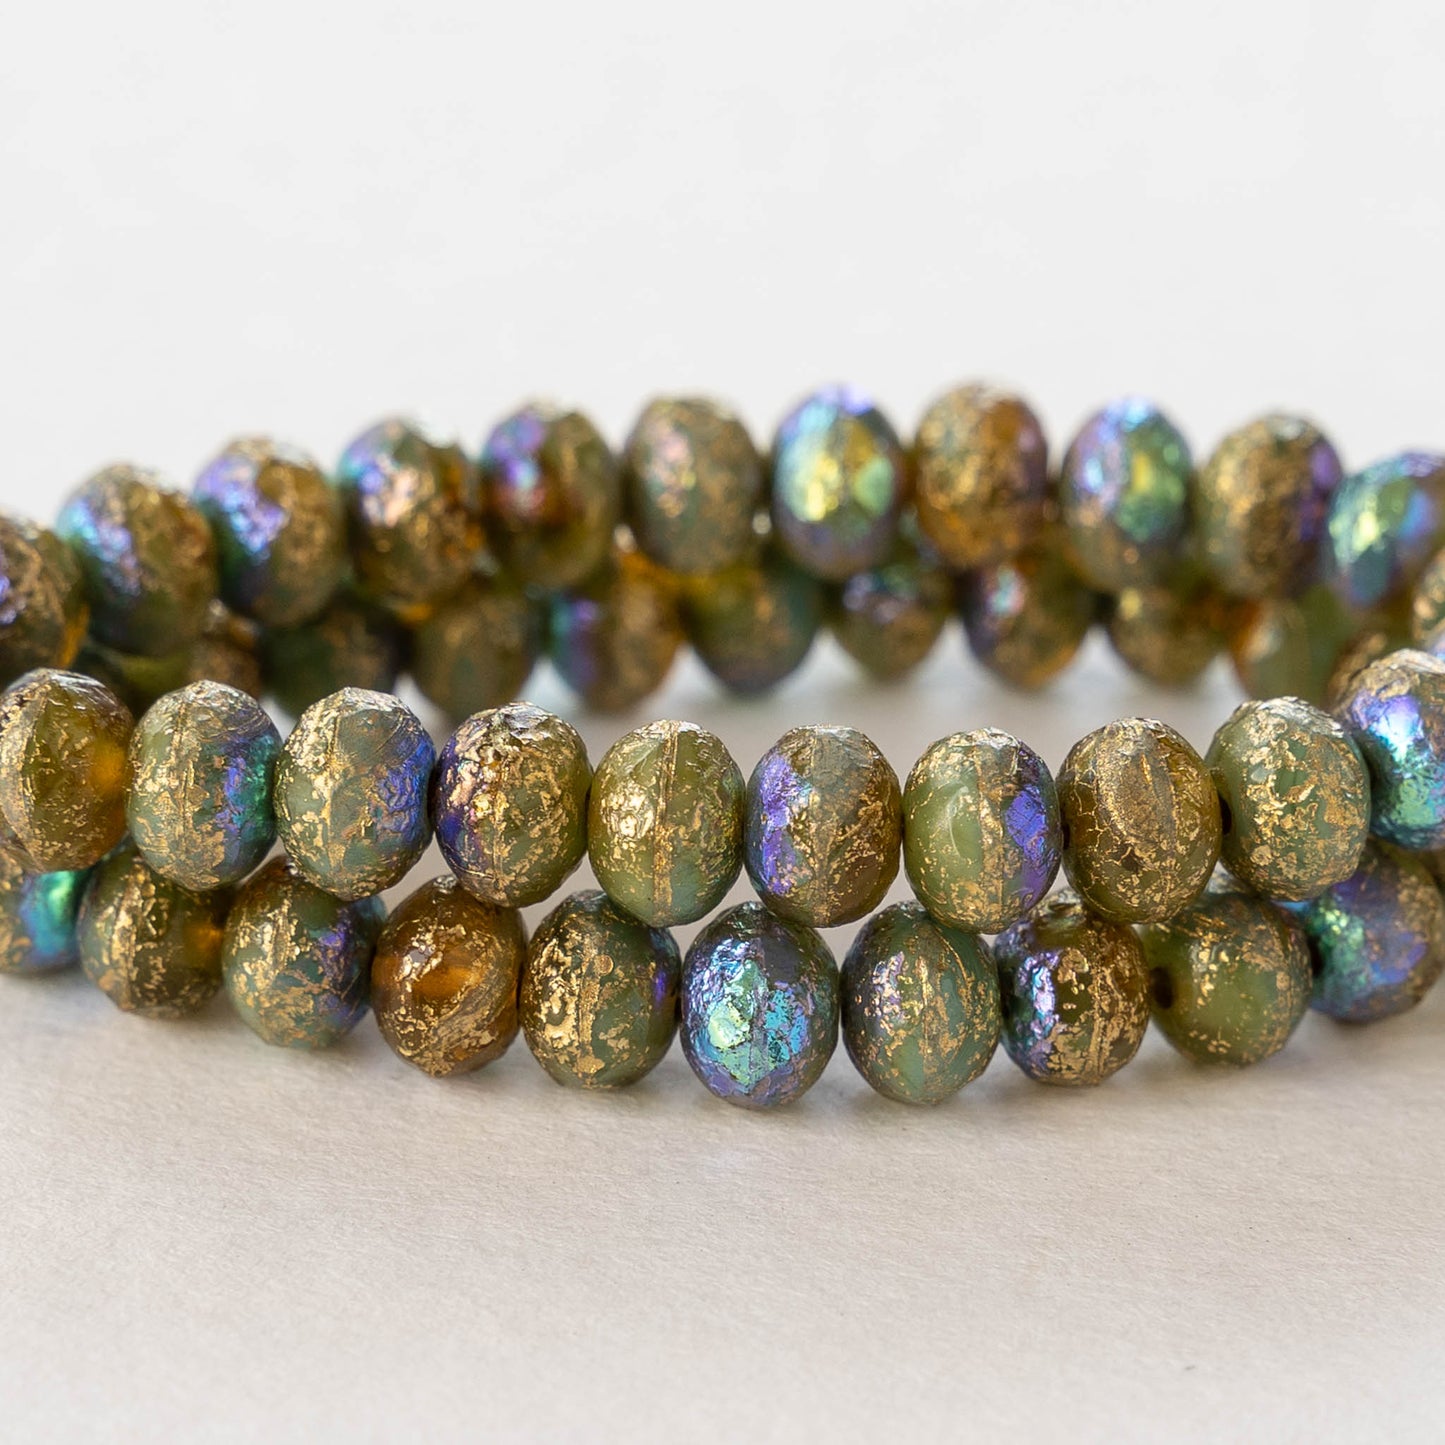 5x7mm Rondelle -  Etched Amber and Sky Blue AB Gold Wash - 25 Beads